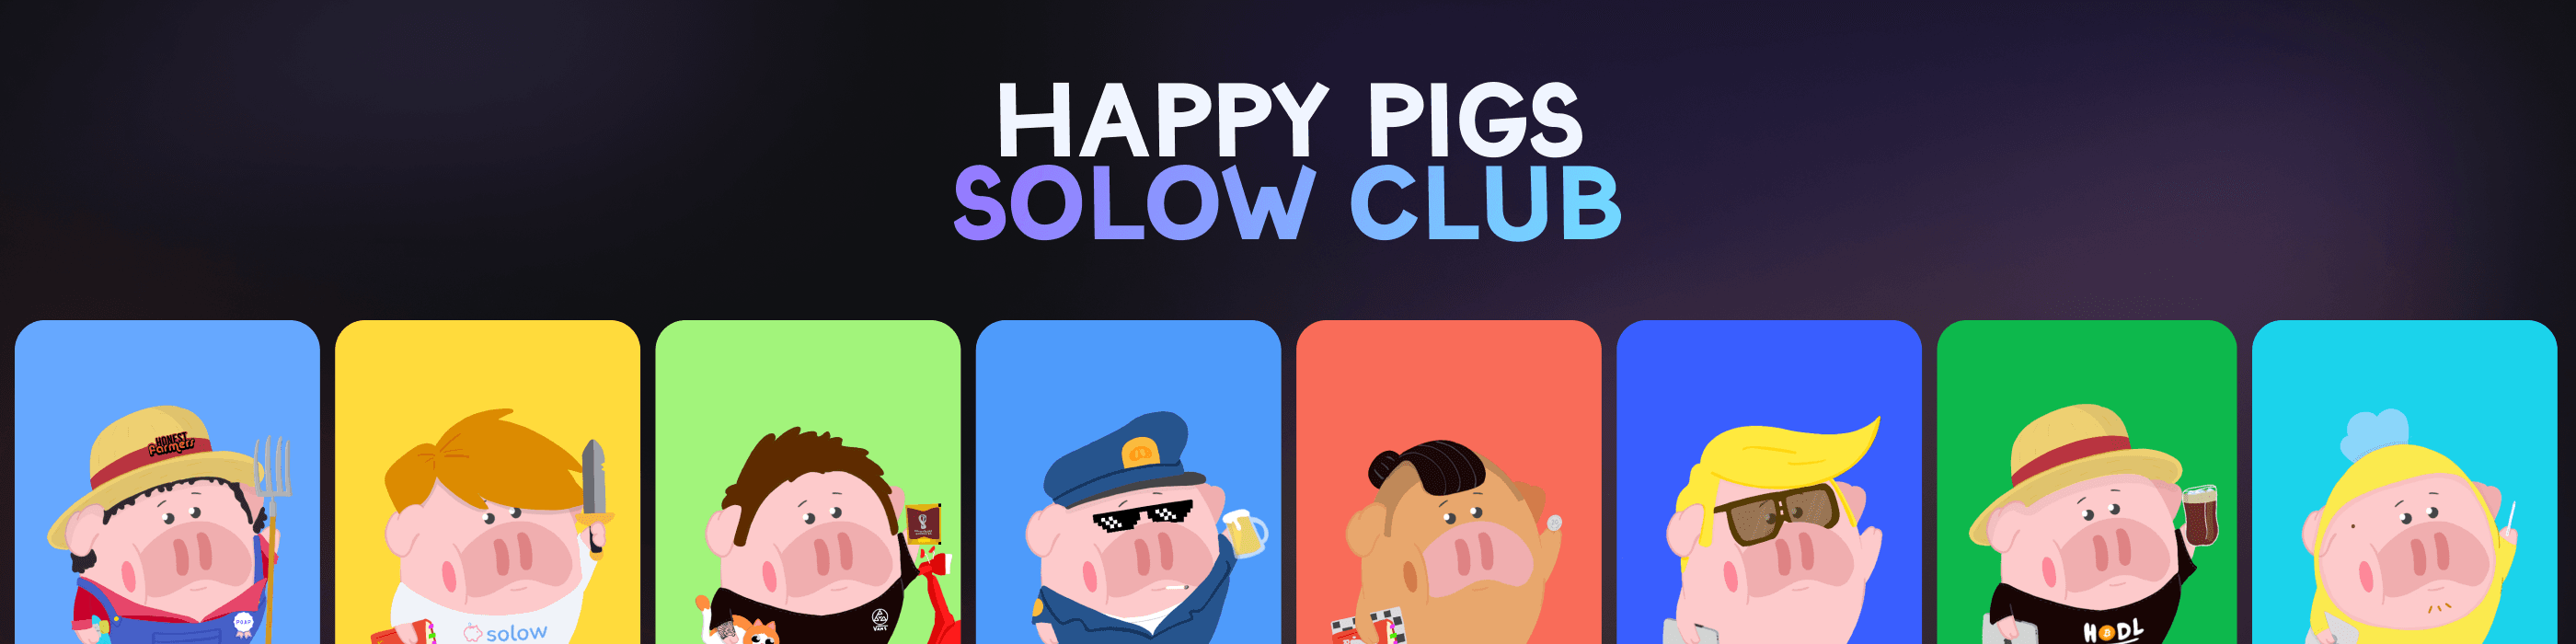 Happy Pigs Solow Club